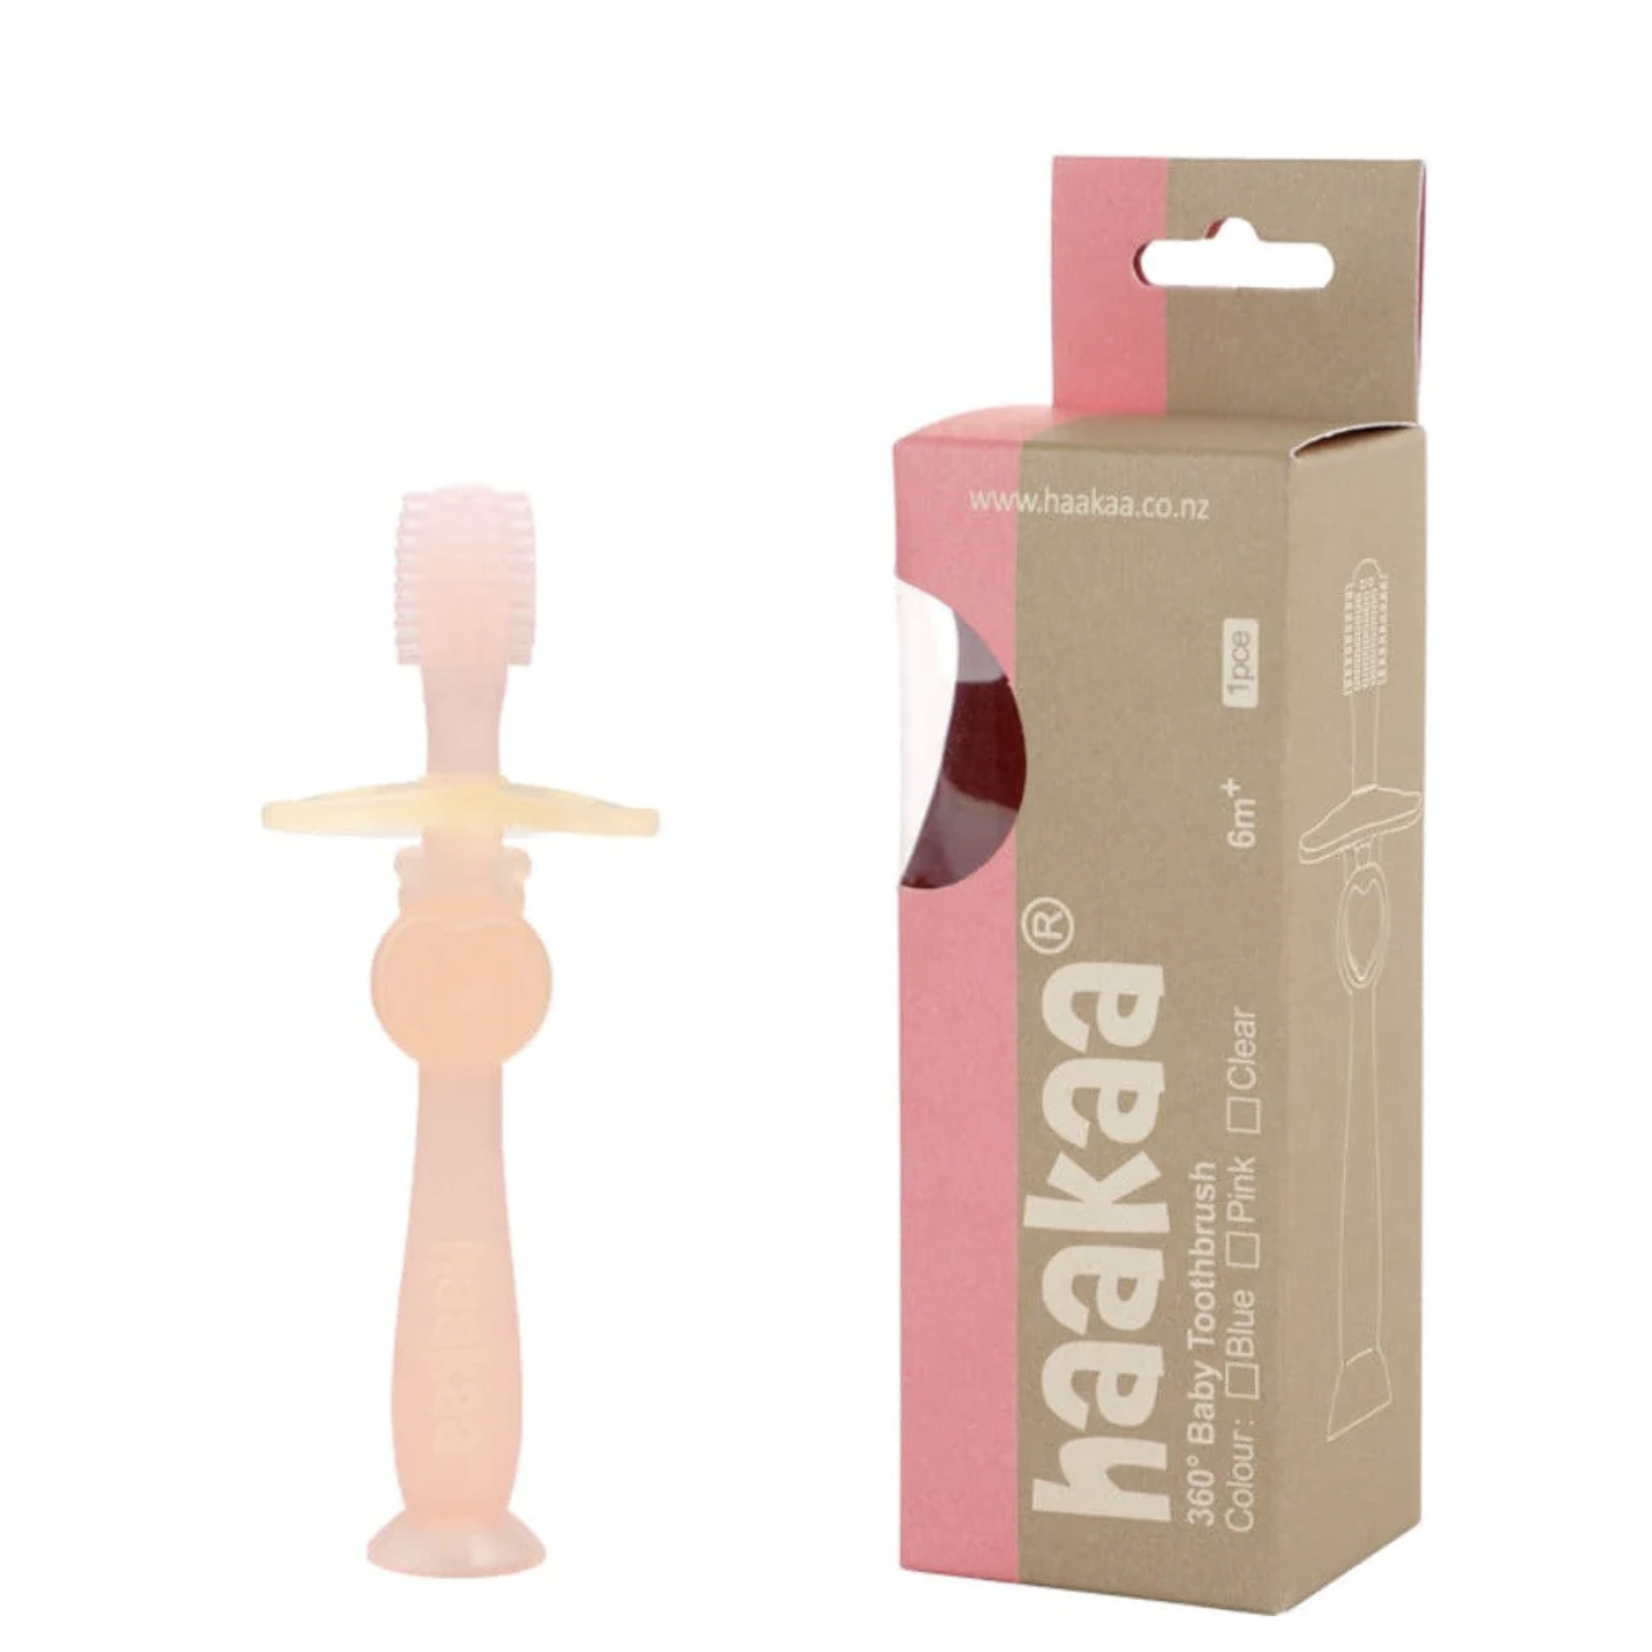 Haakaa 360° Silicone Toothbrush Pink